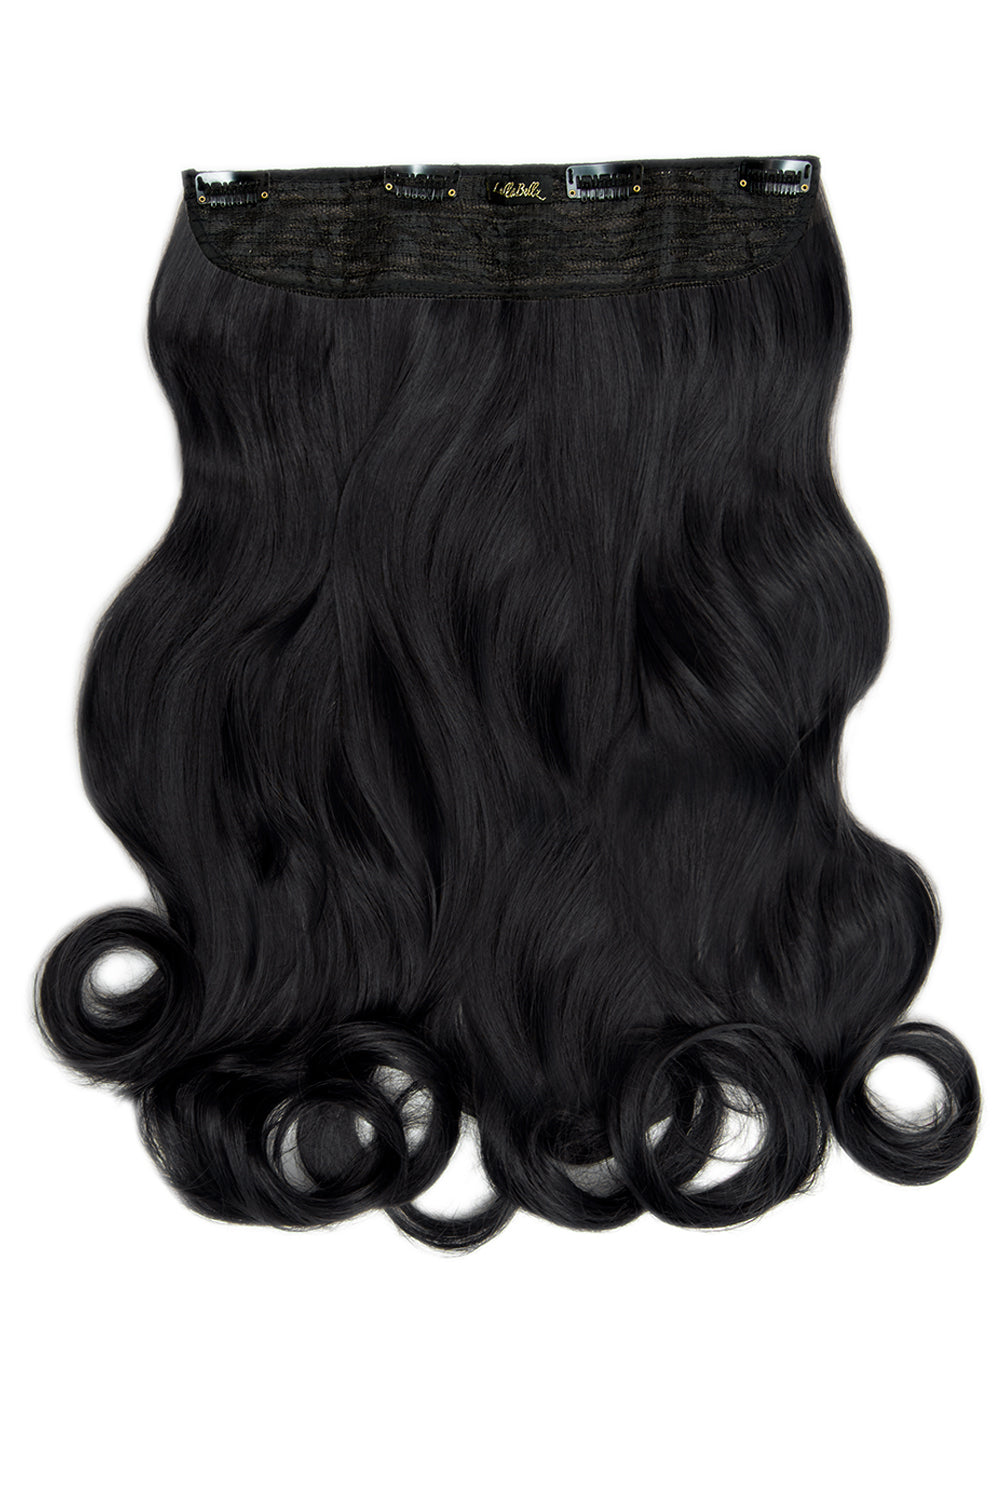 Thick 20" 1 Piece Curly Clip In Hair Extensions - LullaBellz - Jet Black